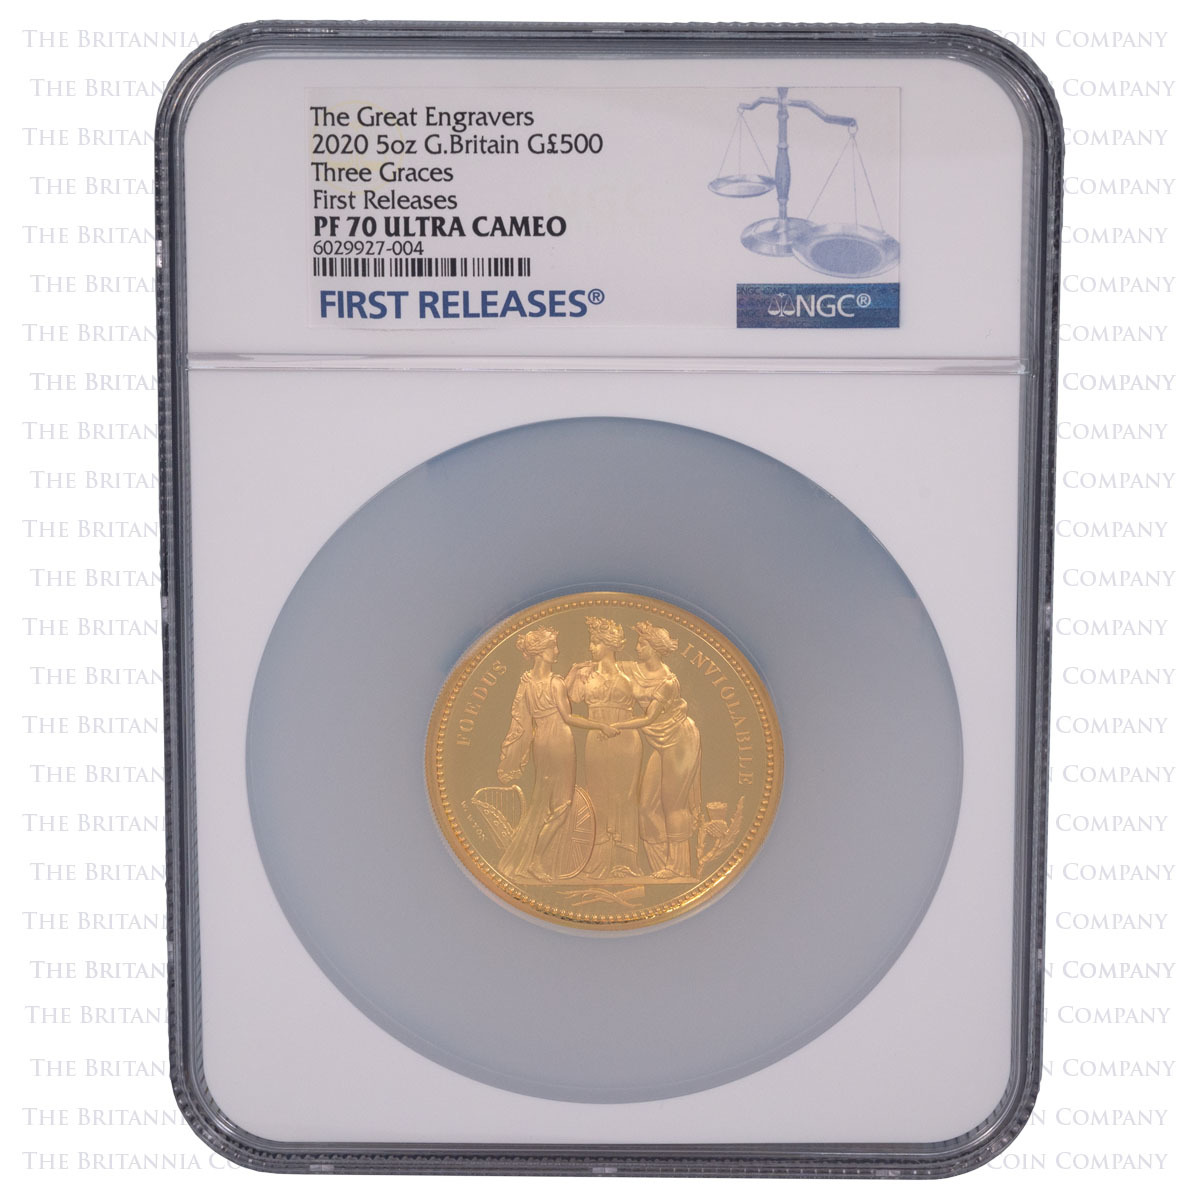 UK20WW5G 2020 Great Engravers Three Graces Five Ounce Gold Proof PF 70 Ultra Cameo First Releases Reverse